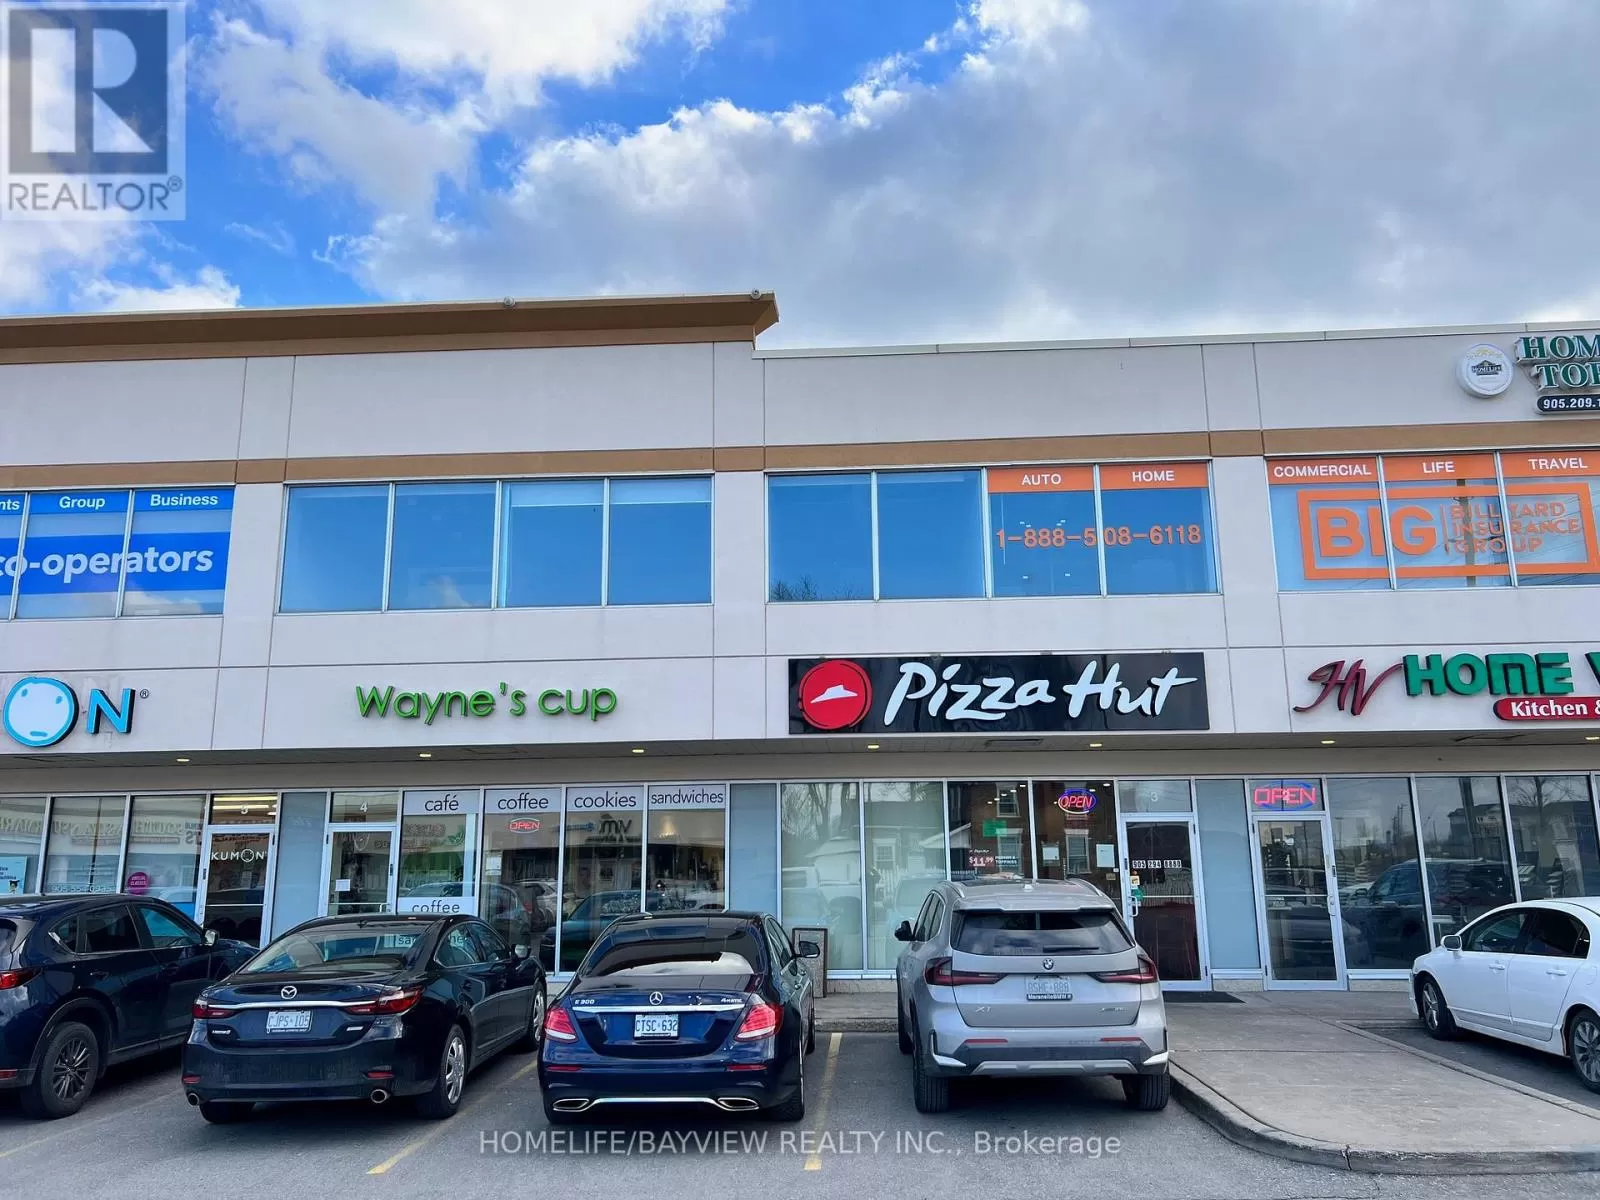 Offices for rent: 203 - 9889 Markham Road, Markham, Ontario L6E 0B5